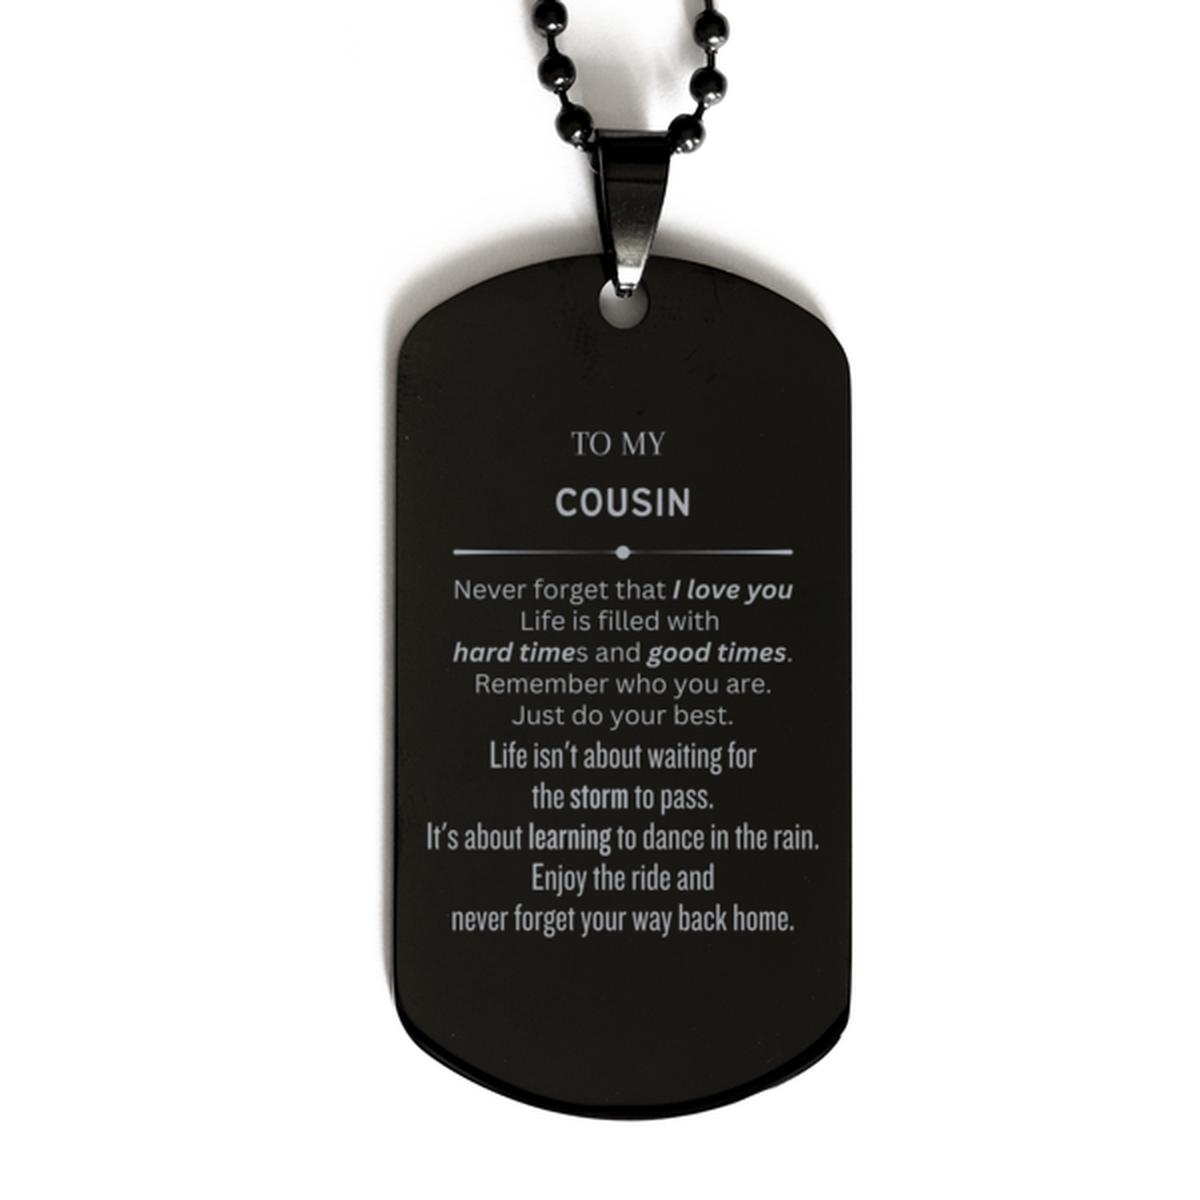 Christmas Cousin Black Dog Tag Gifts, To My Cousin Birthday Thank You Gifts For Cousin, Graduation Unique Gifts For Cousin To My Cousin Never forget that I love you life is filled with hard times and good times. Remember who you are. Just do your best